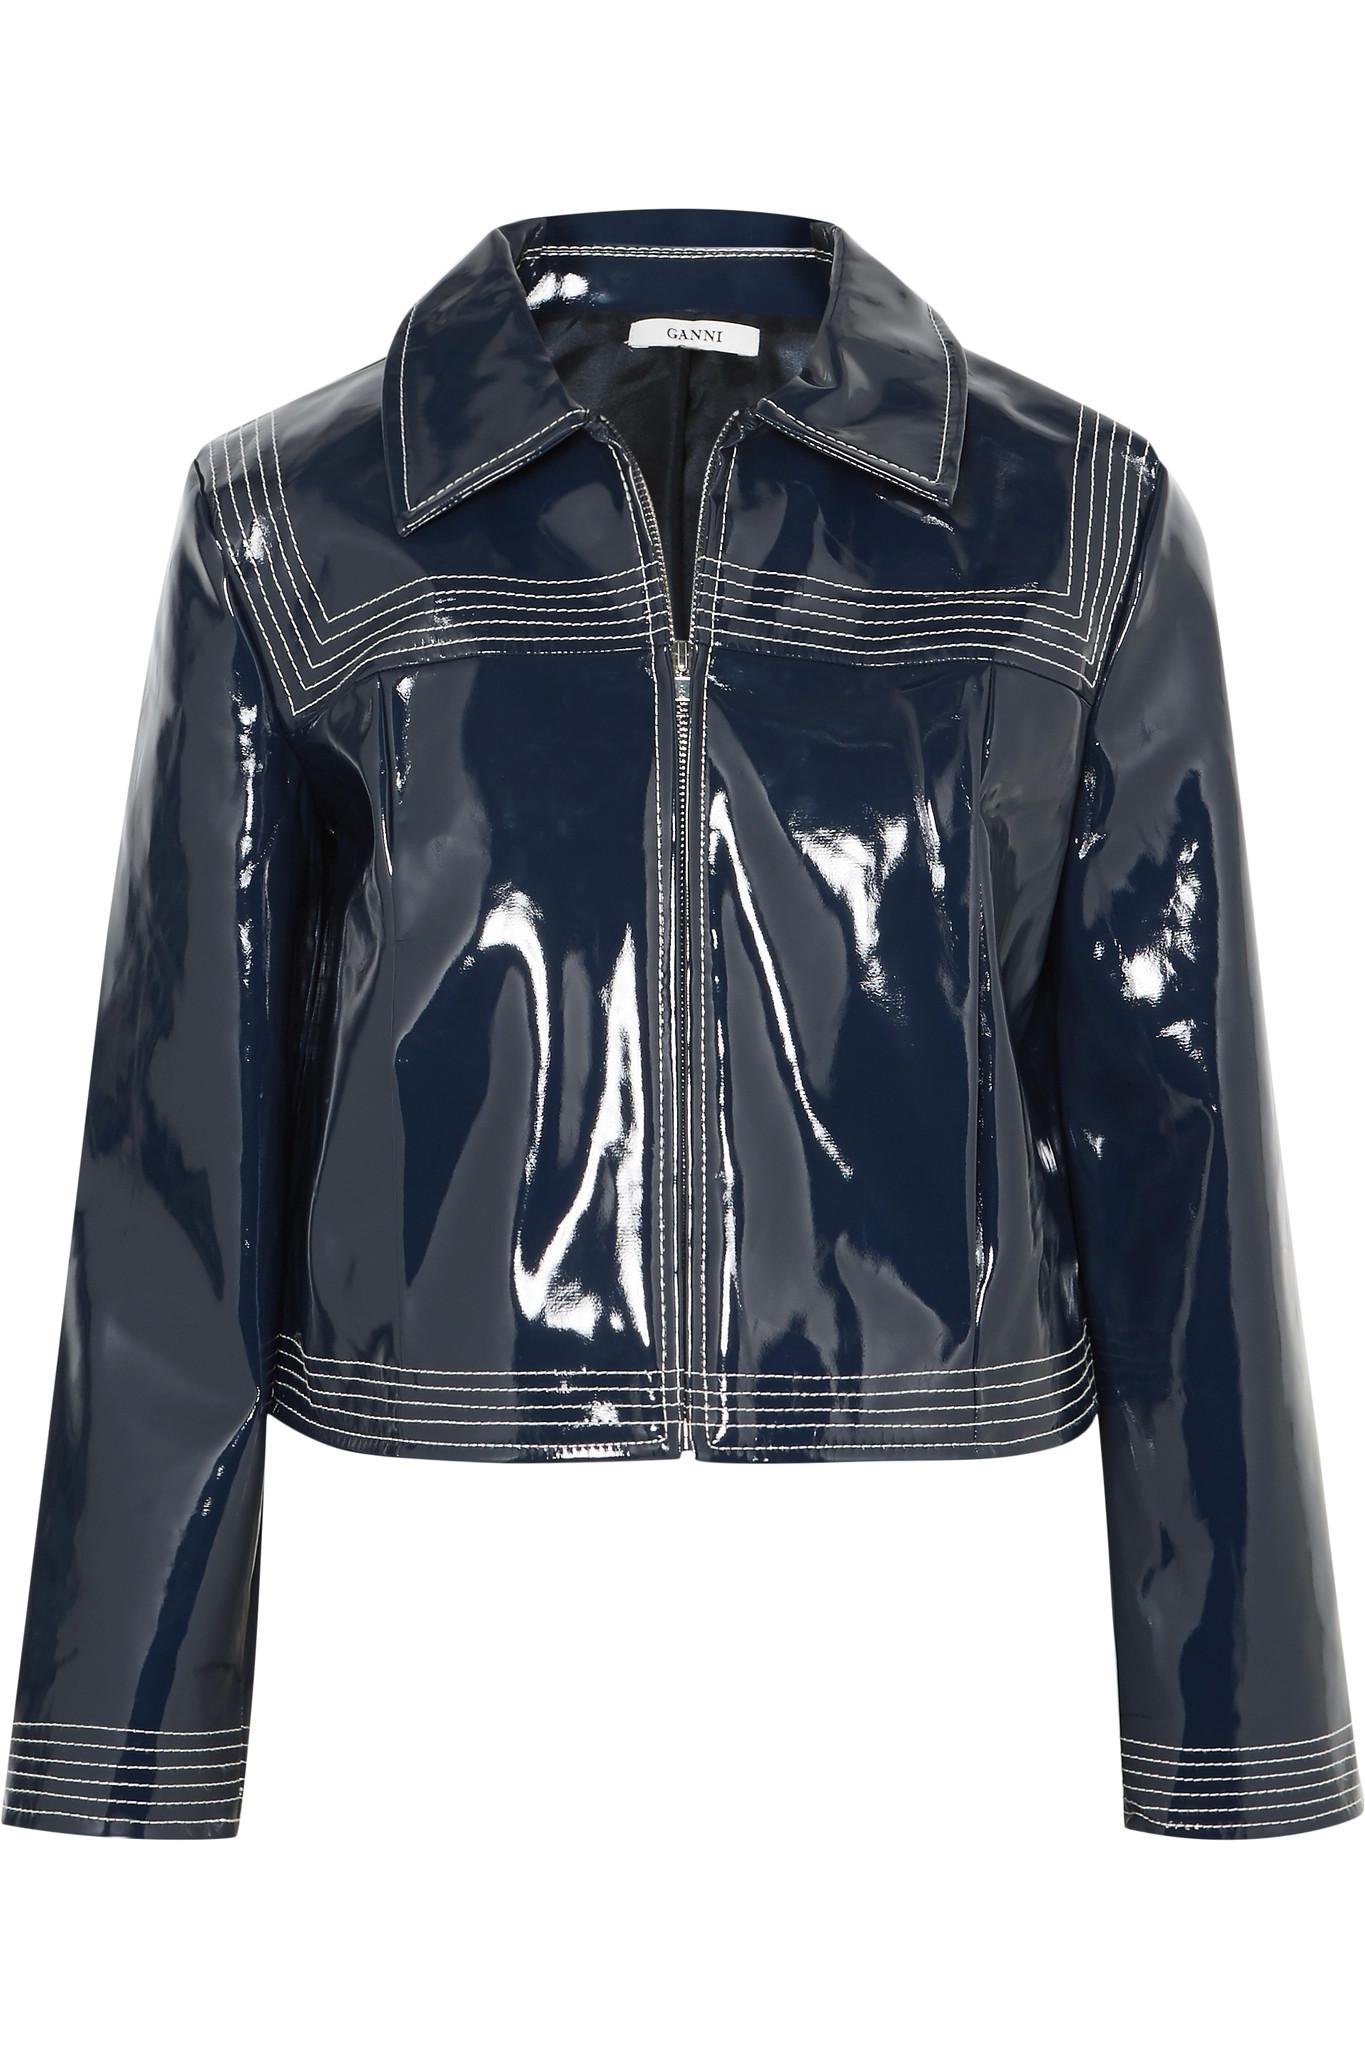 Ganni Cropped Faux Patent-leather Jacket in Dark Blue (Blue) - Lyst